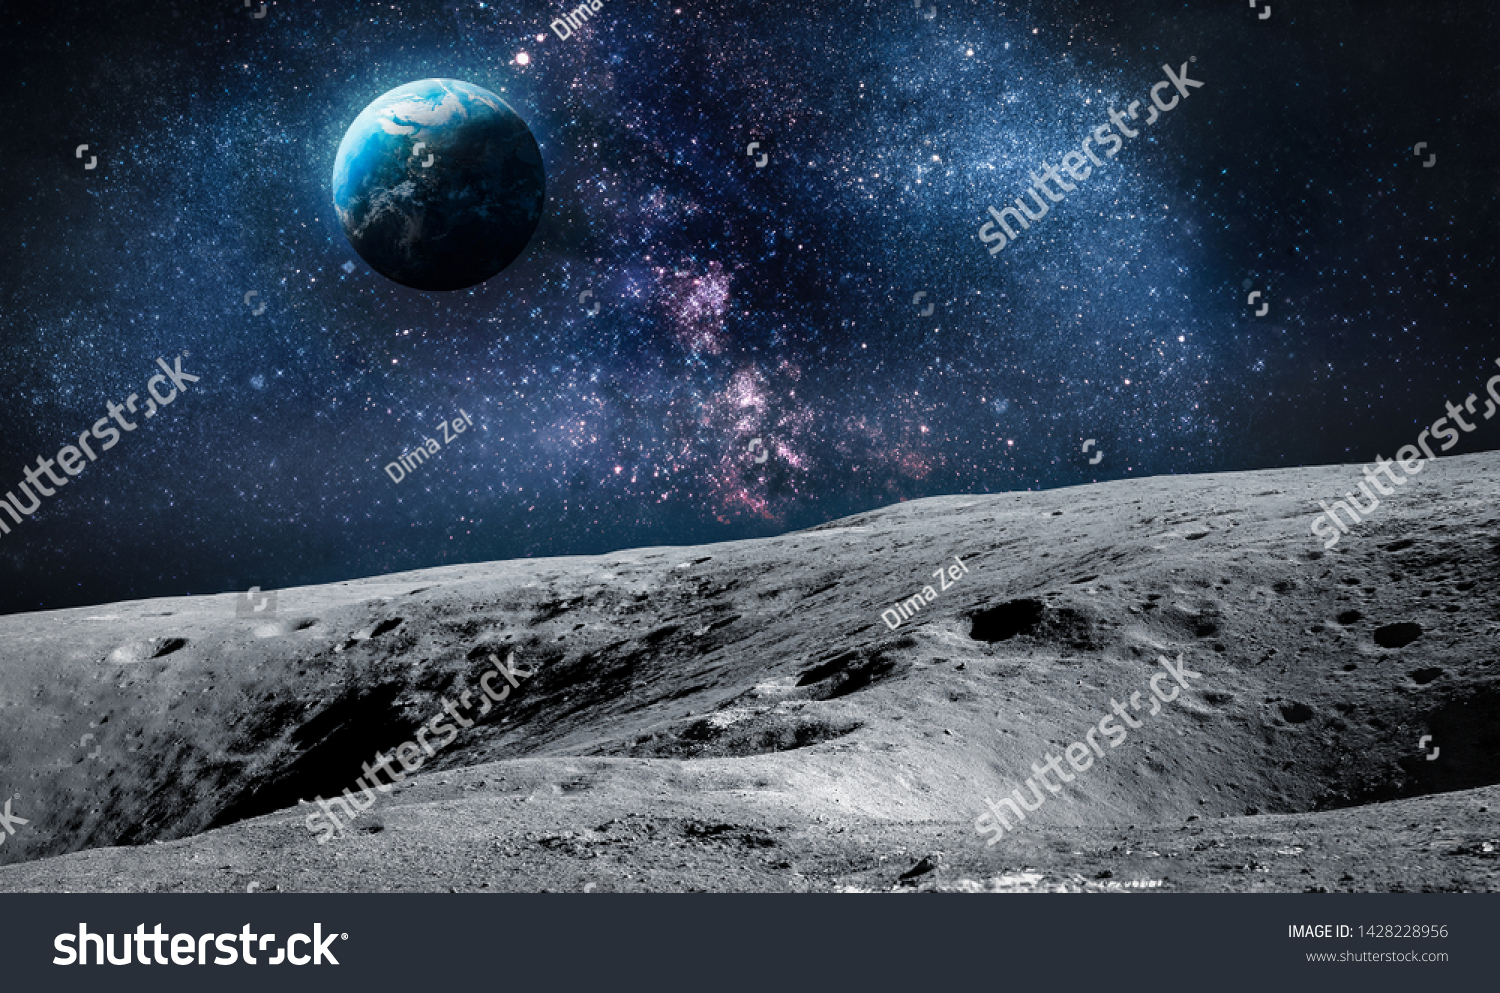 Surface of Moon. Planet Earth on background. Space collage. Elements of this image furnished by NASA. #1428228956